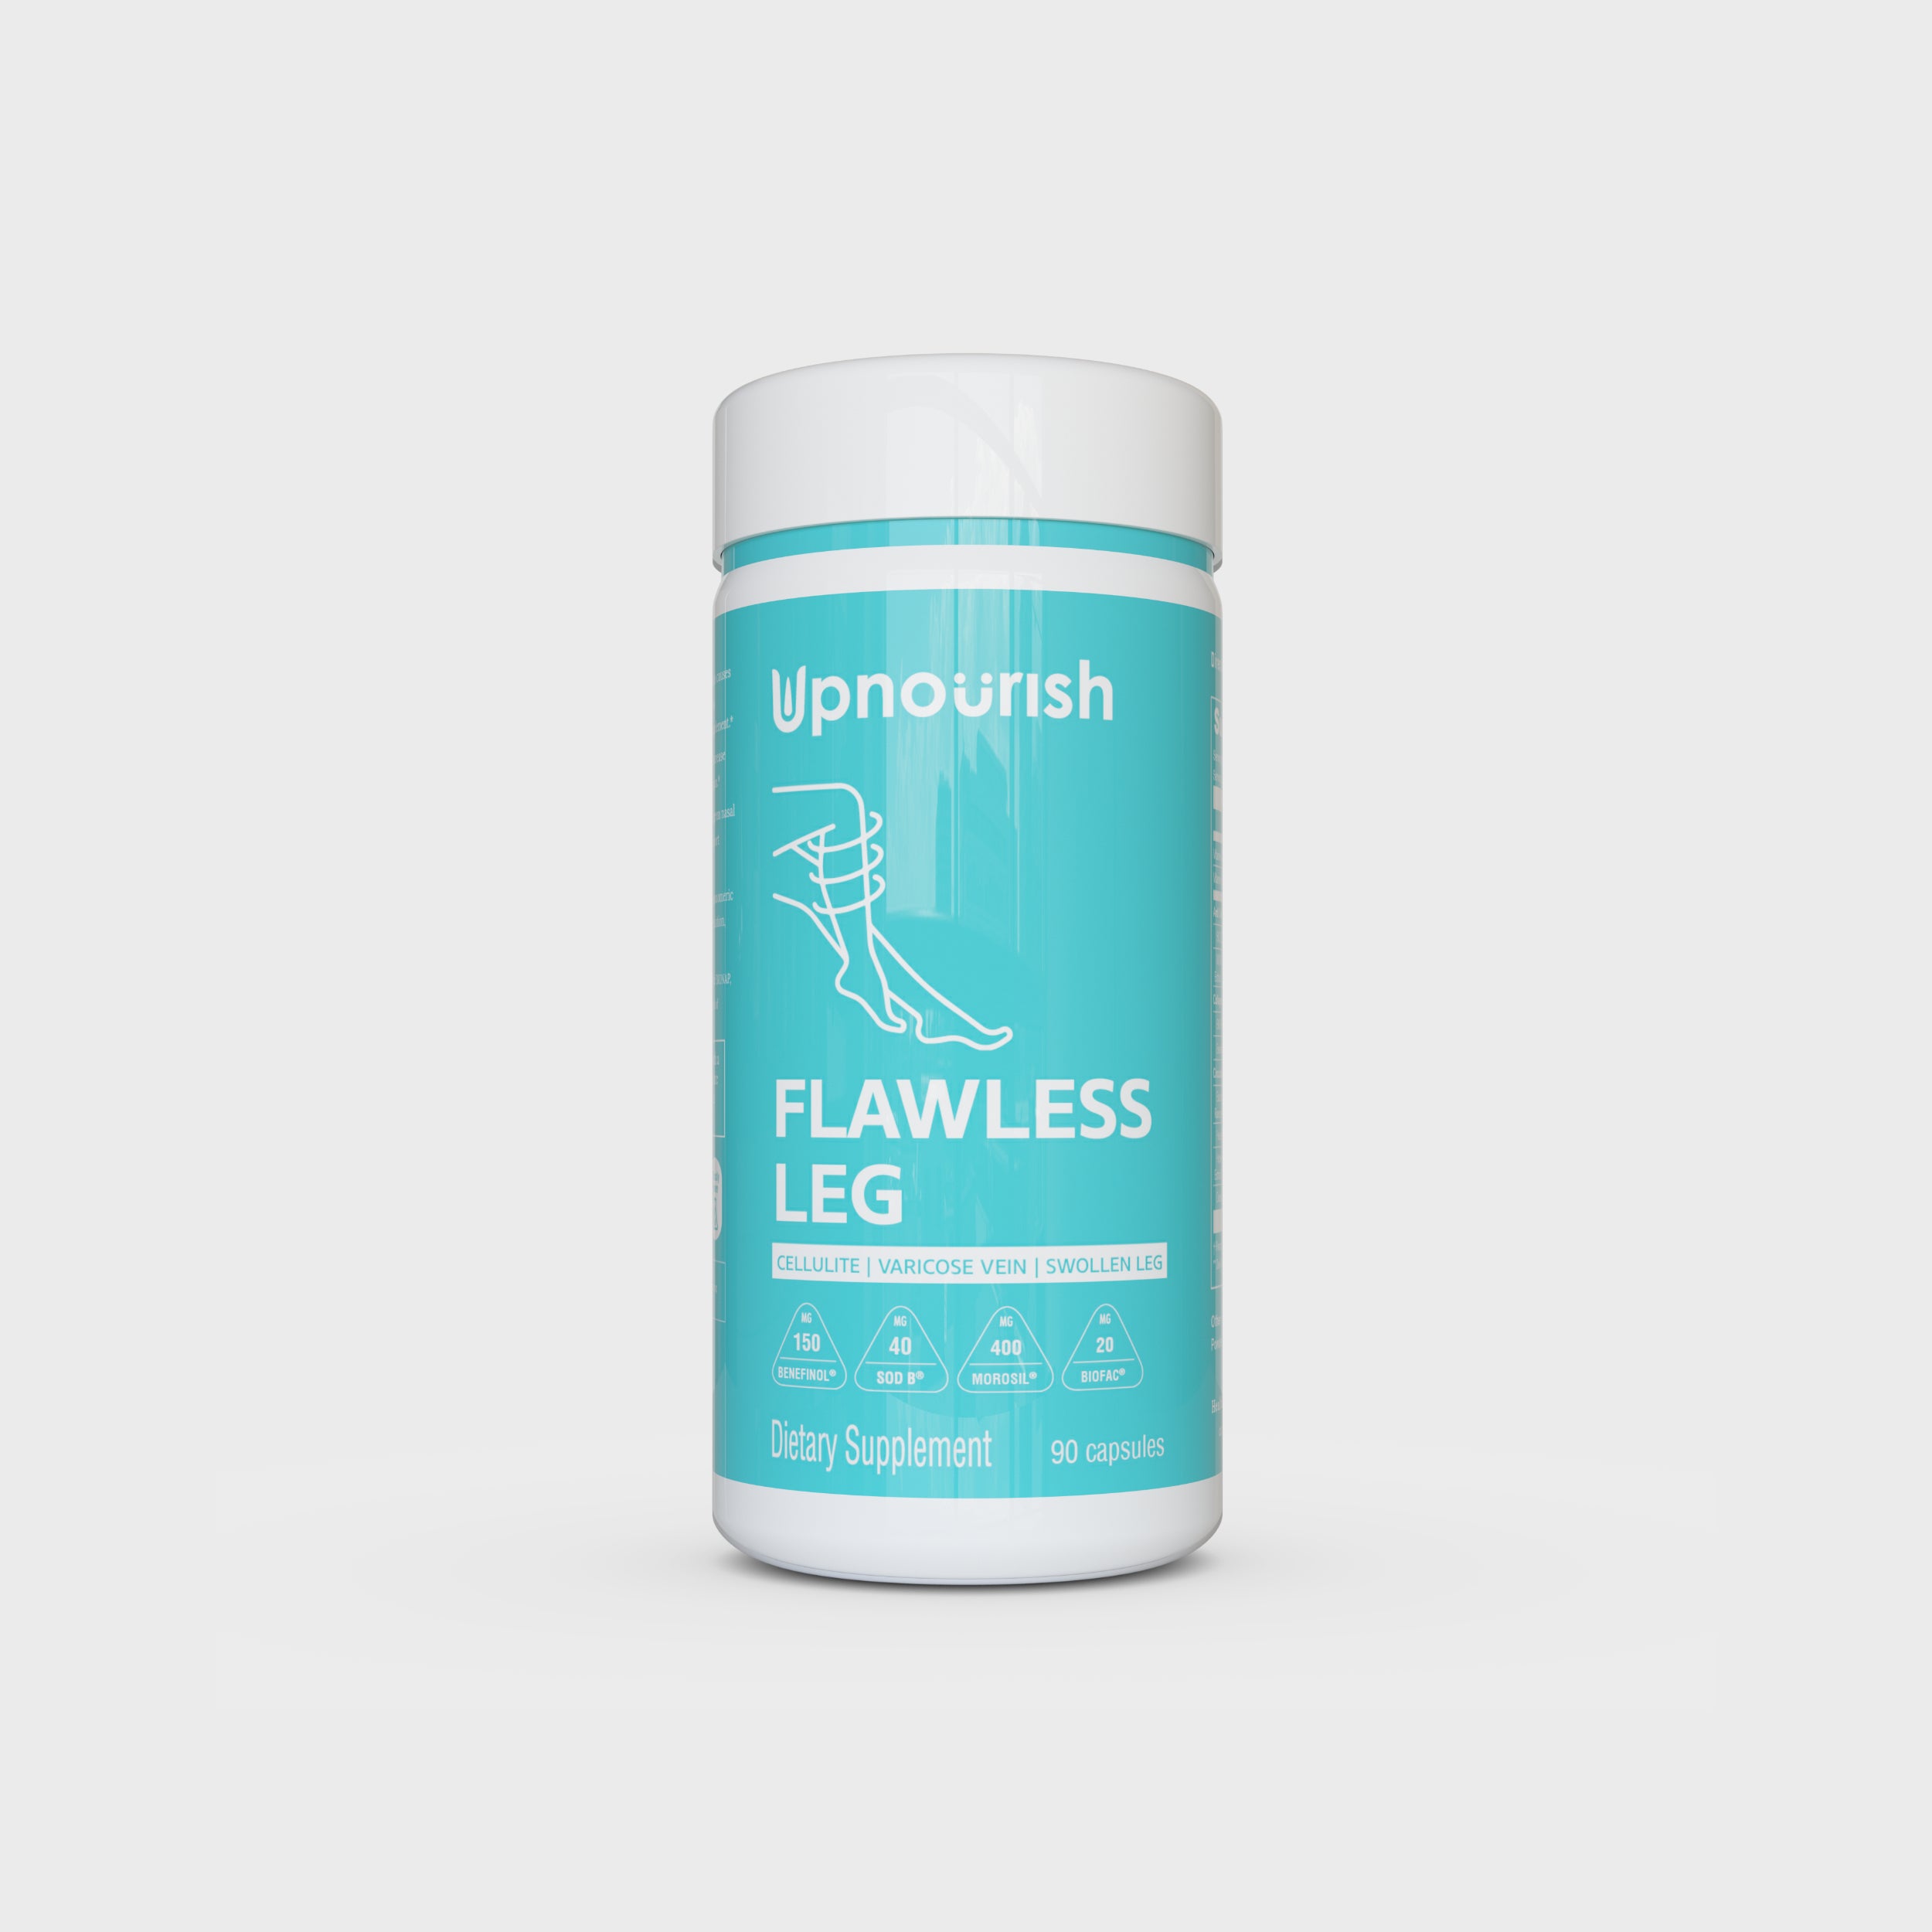 Can't decide between flawless legs or lustrous hair? We've got you covered!  🦵✨ Our UpNourish Flawless Leg capsules are here to tackl